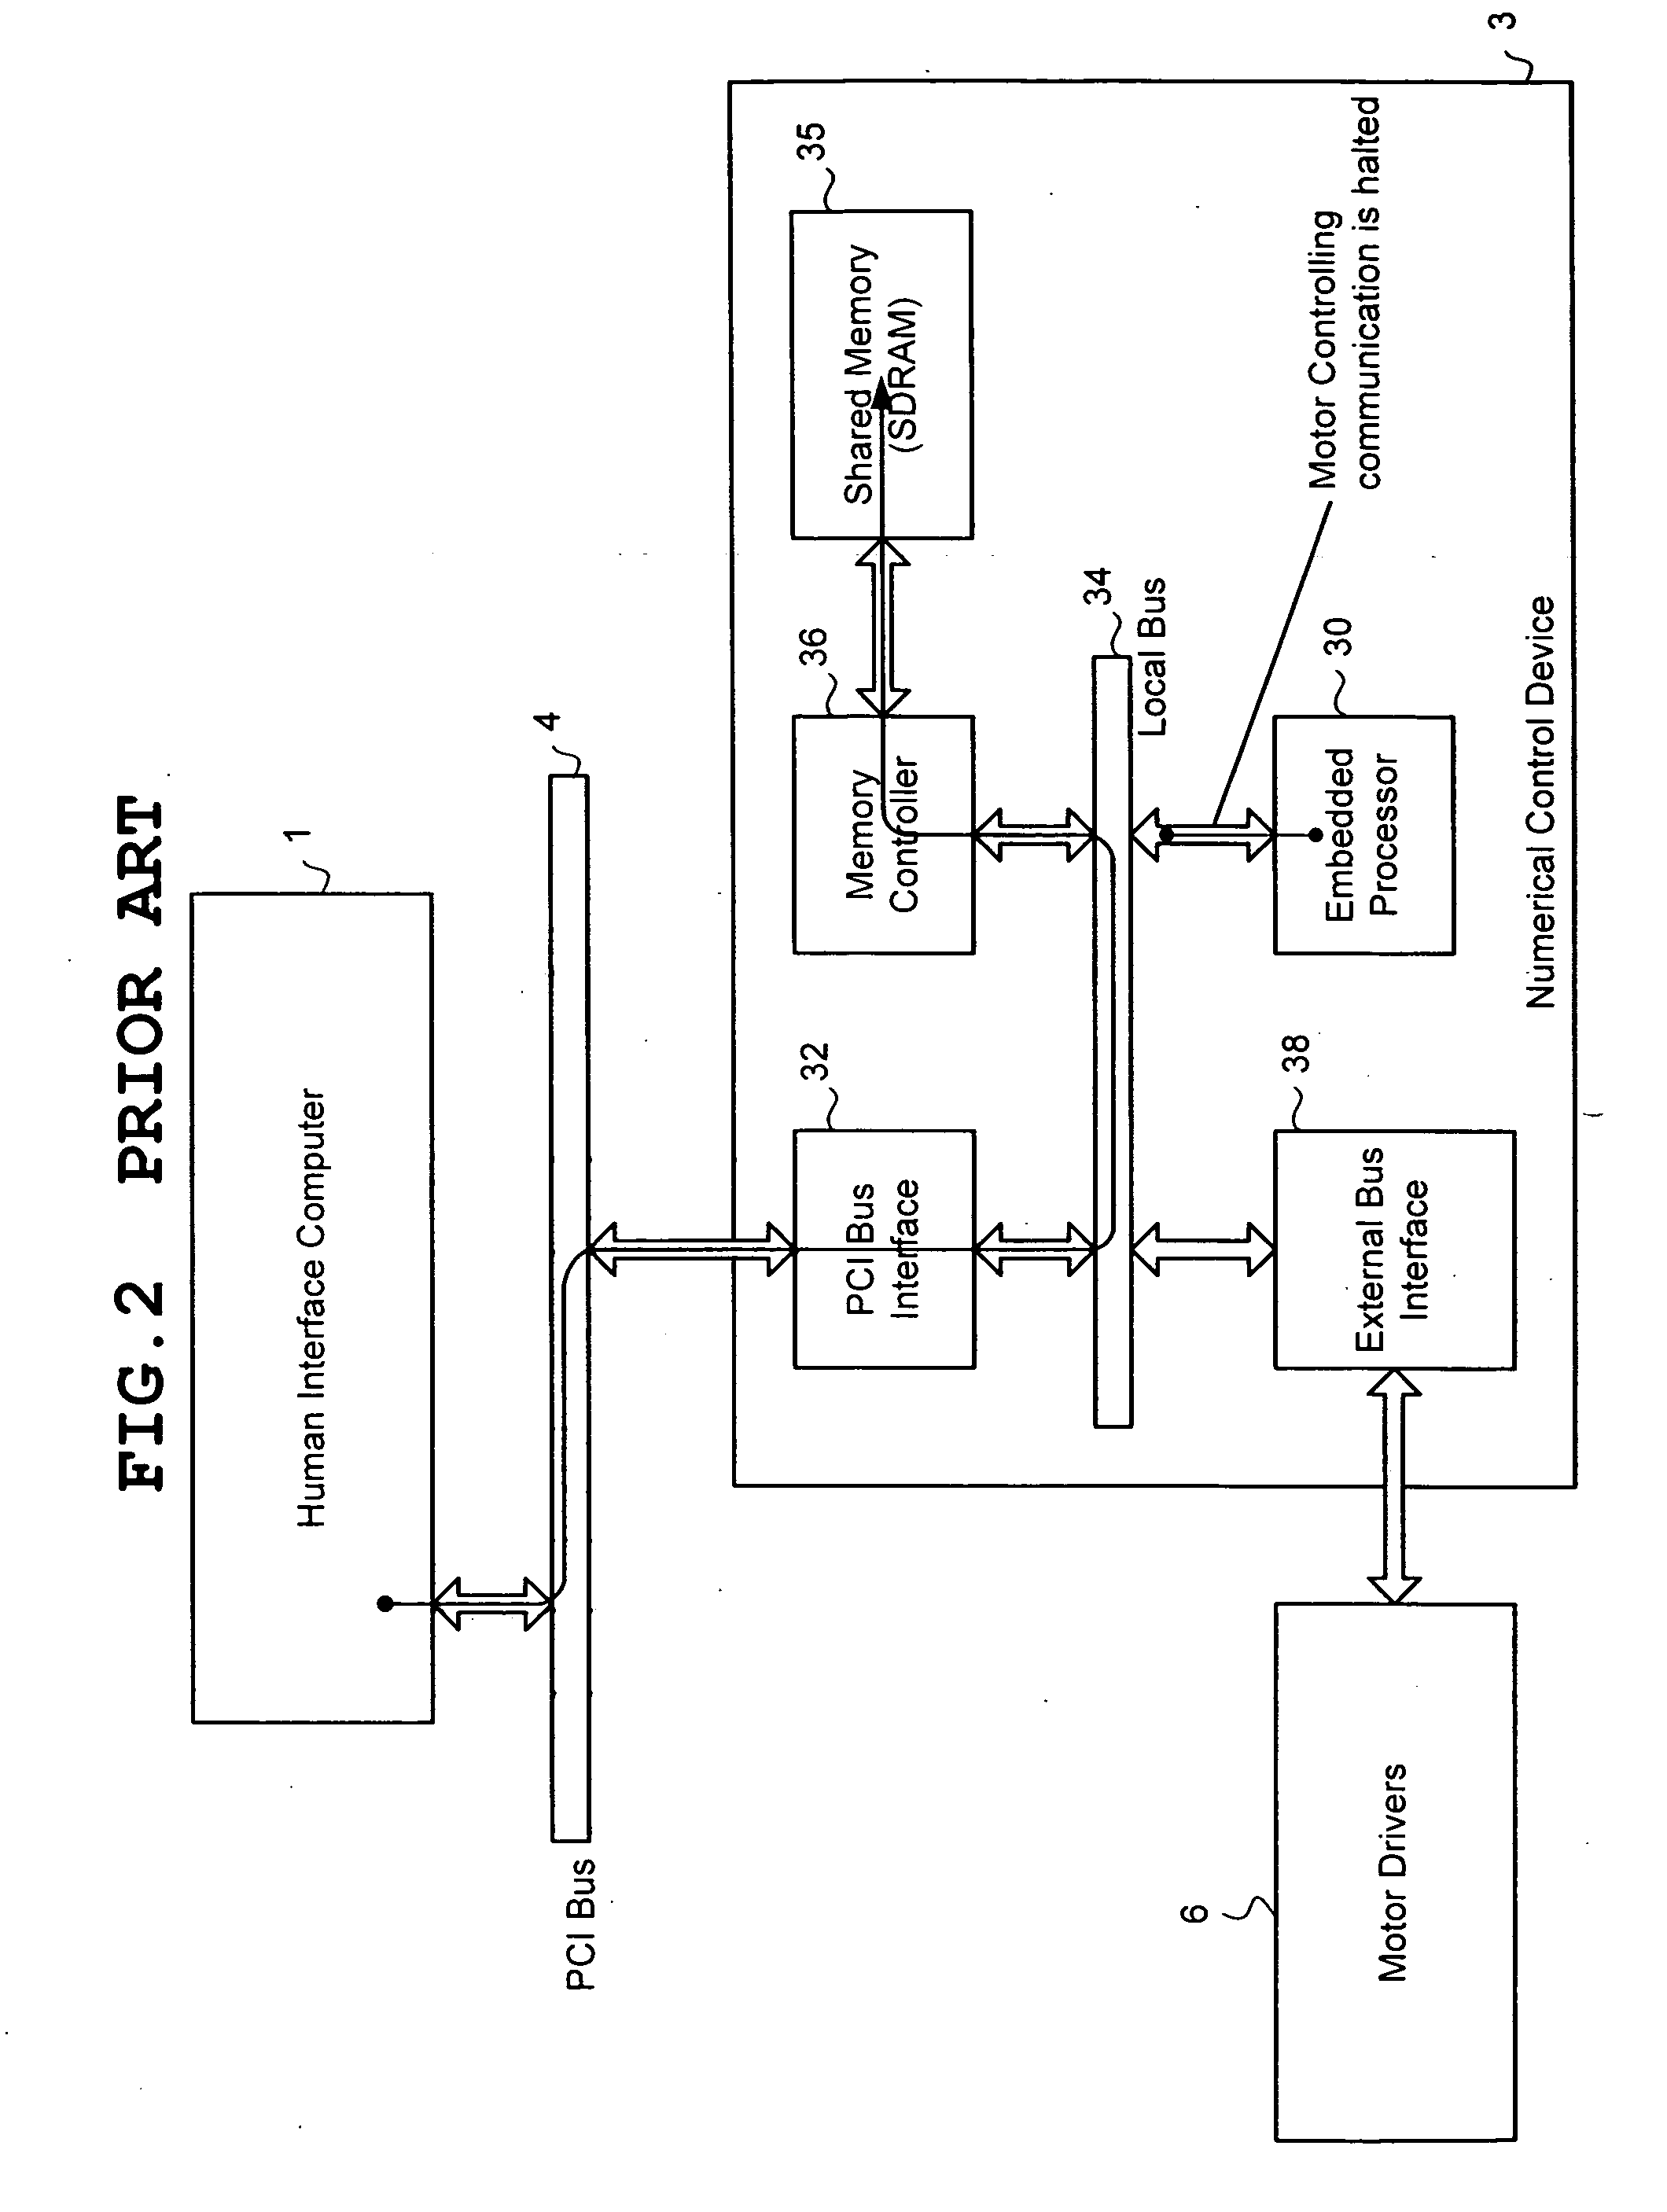 Computerized numerical control system with human interface using low cost shared memory